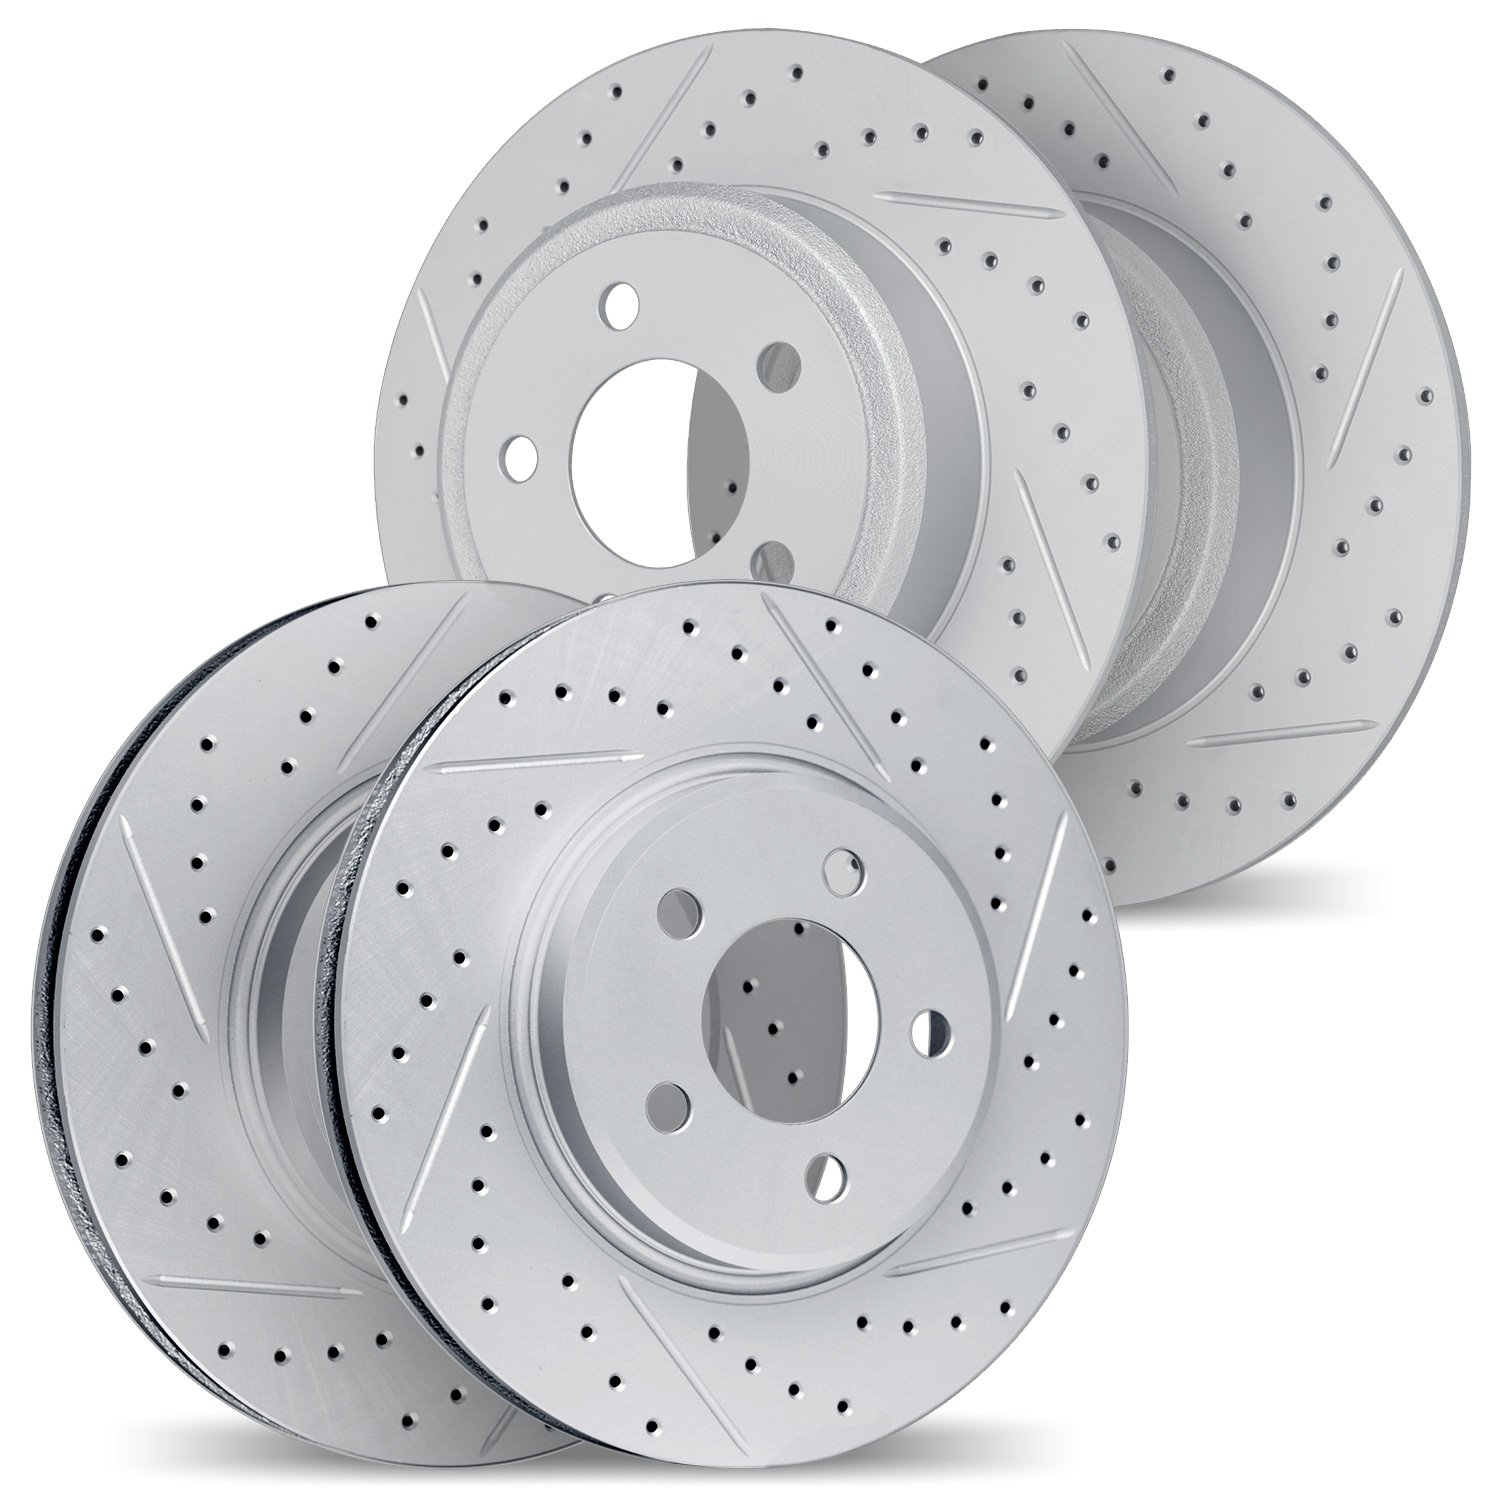 2004-39002 Geoperformance Drilled/Slotted Brake Rotors, 2008-2014 Mopar, Position: Front and Rear